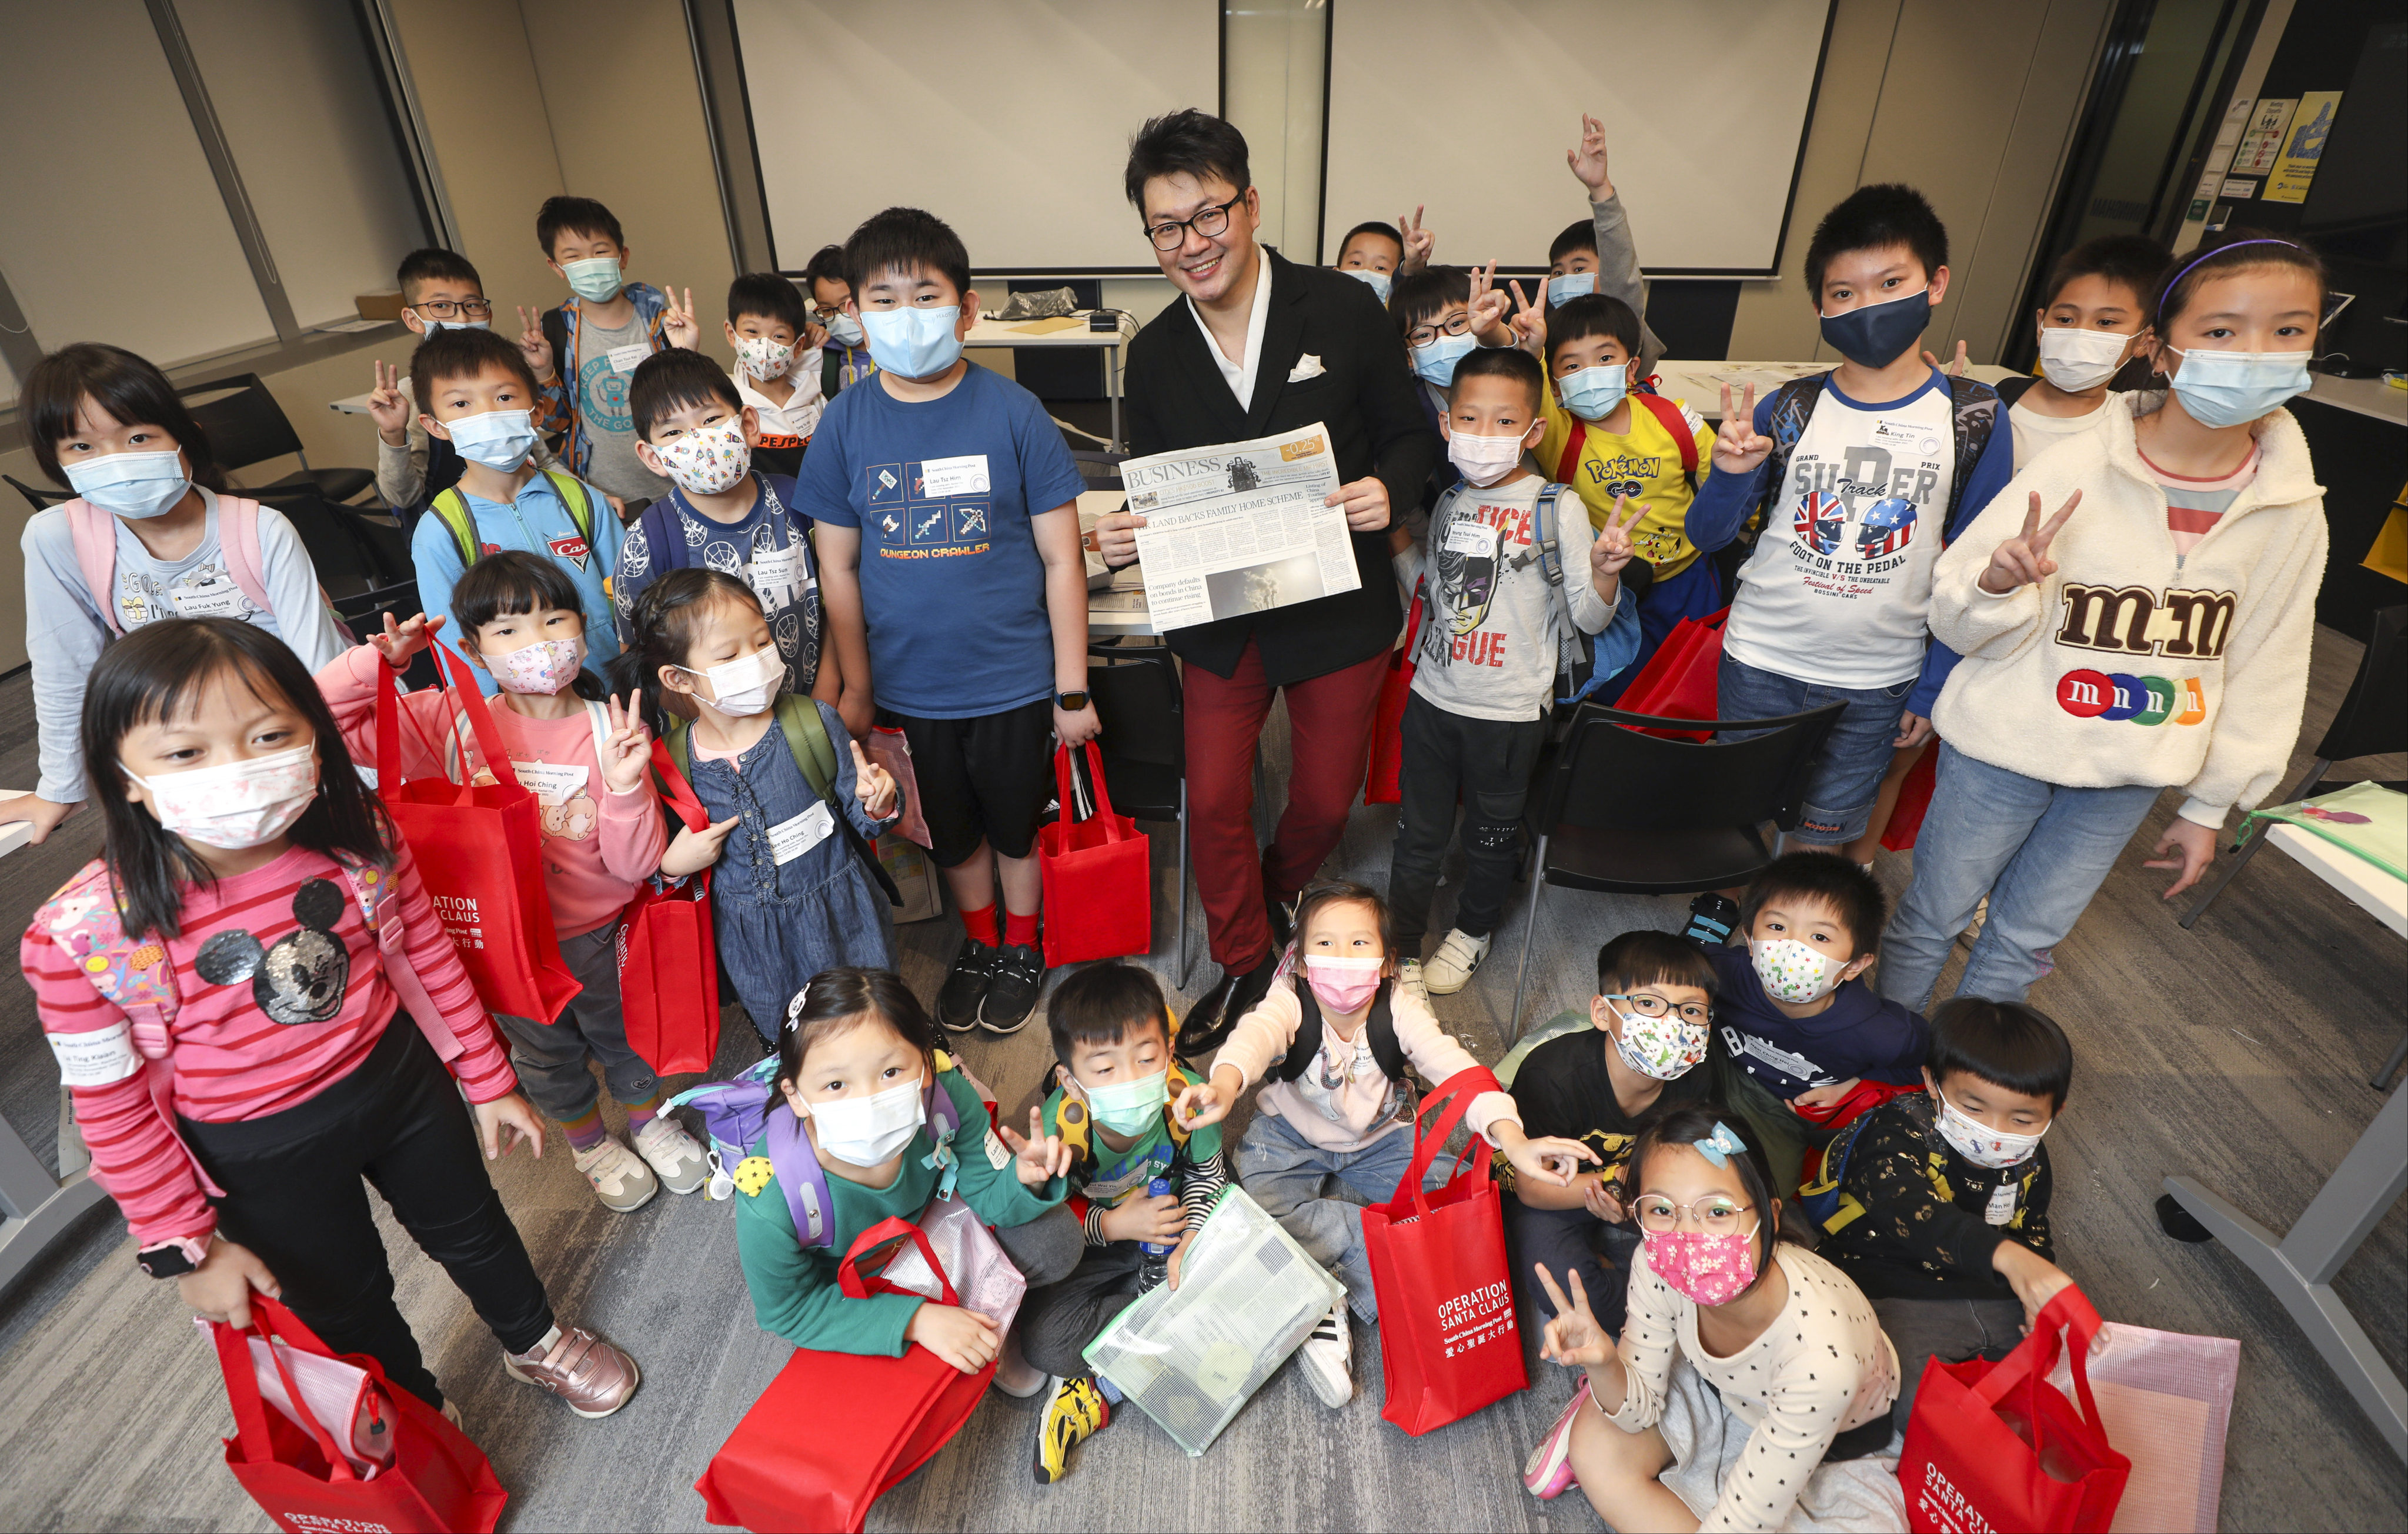 Hong Kong Magician and Mentalist Zenneth Kok with the children who attended his workshop on November 27. Photo: Xiaomei Chen